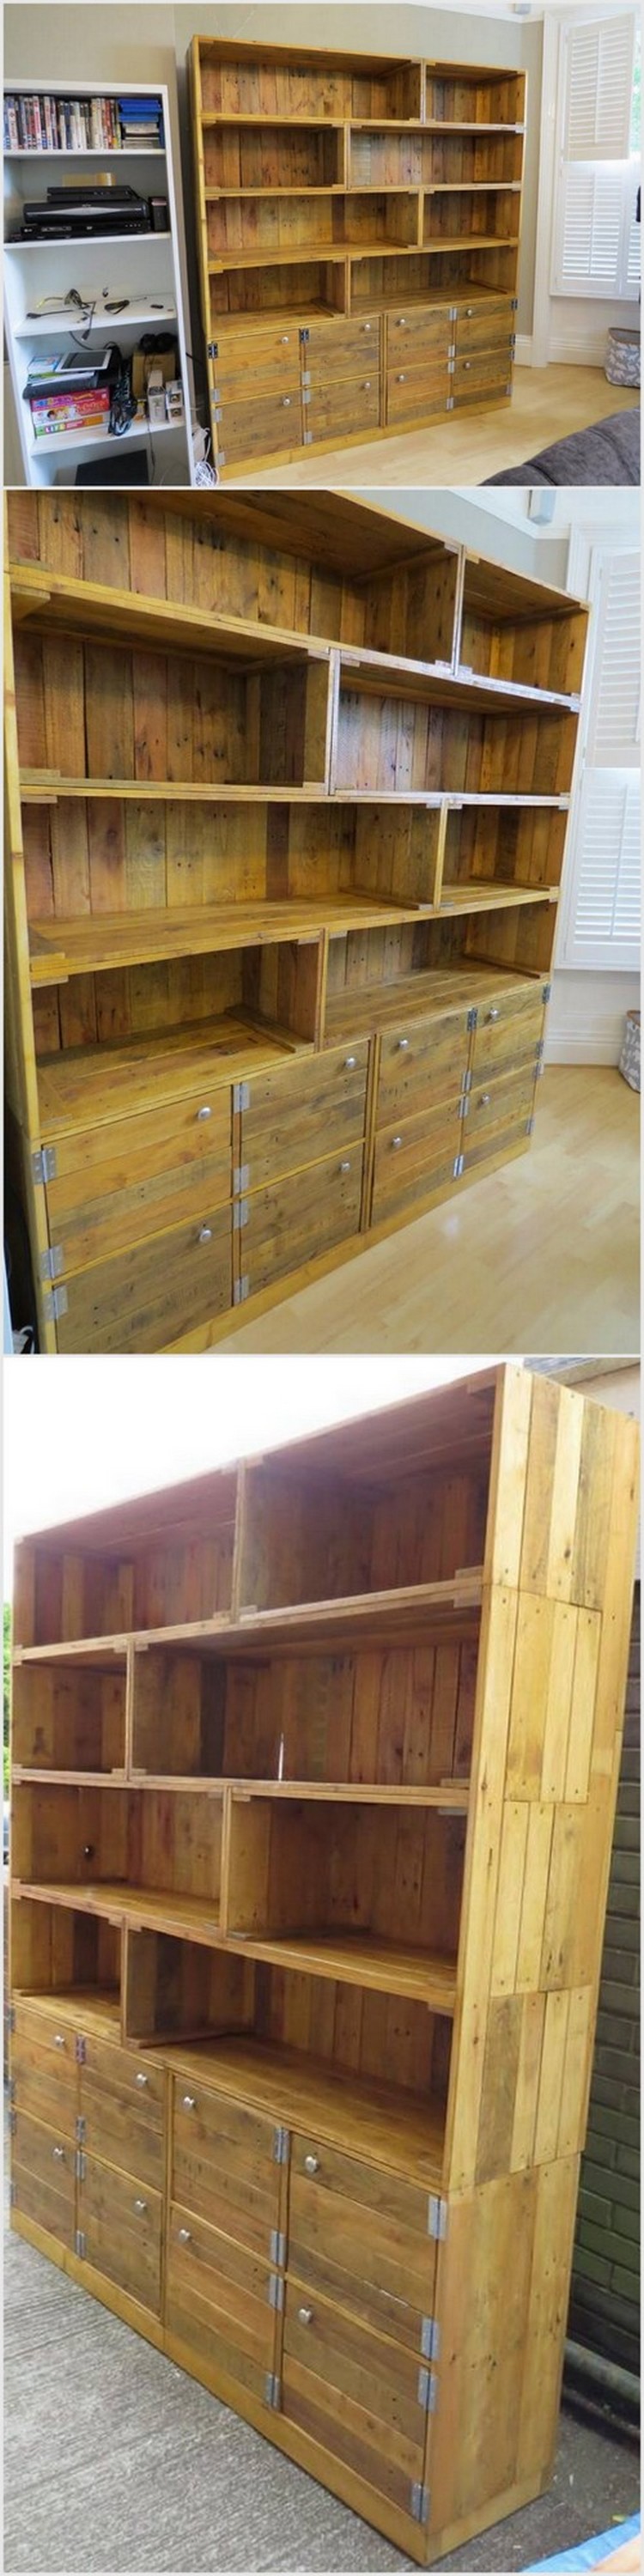 Big Pallet Shelving Unit and Cabinets